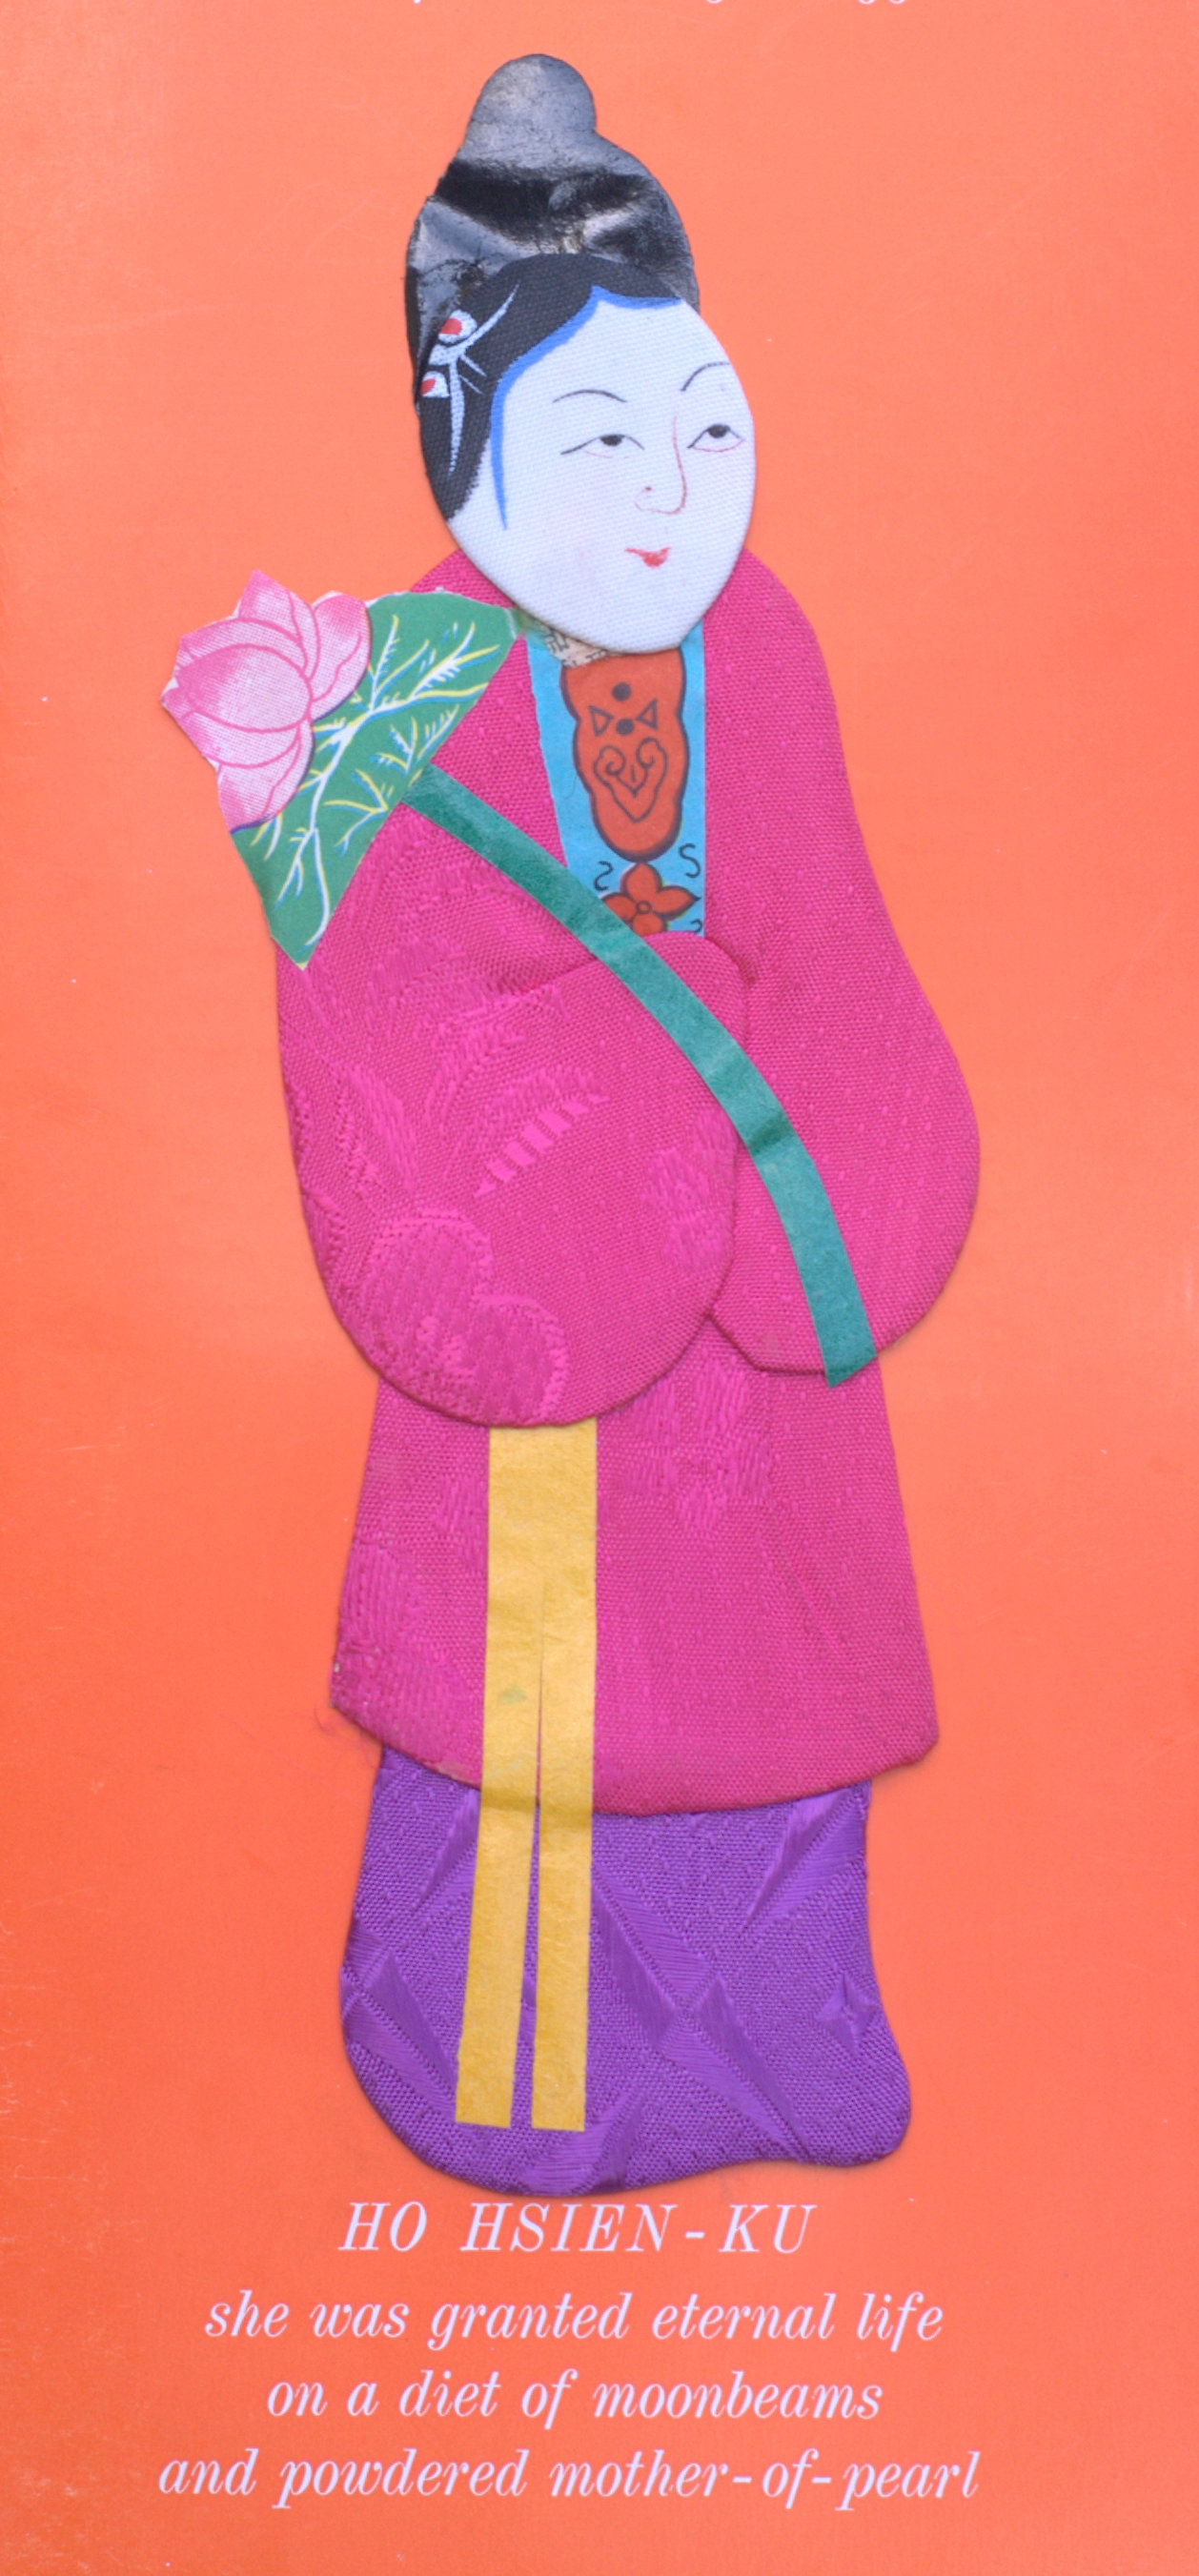 paper and fabric depiction of Ho Hsien-ku